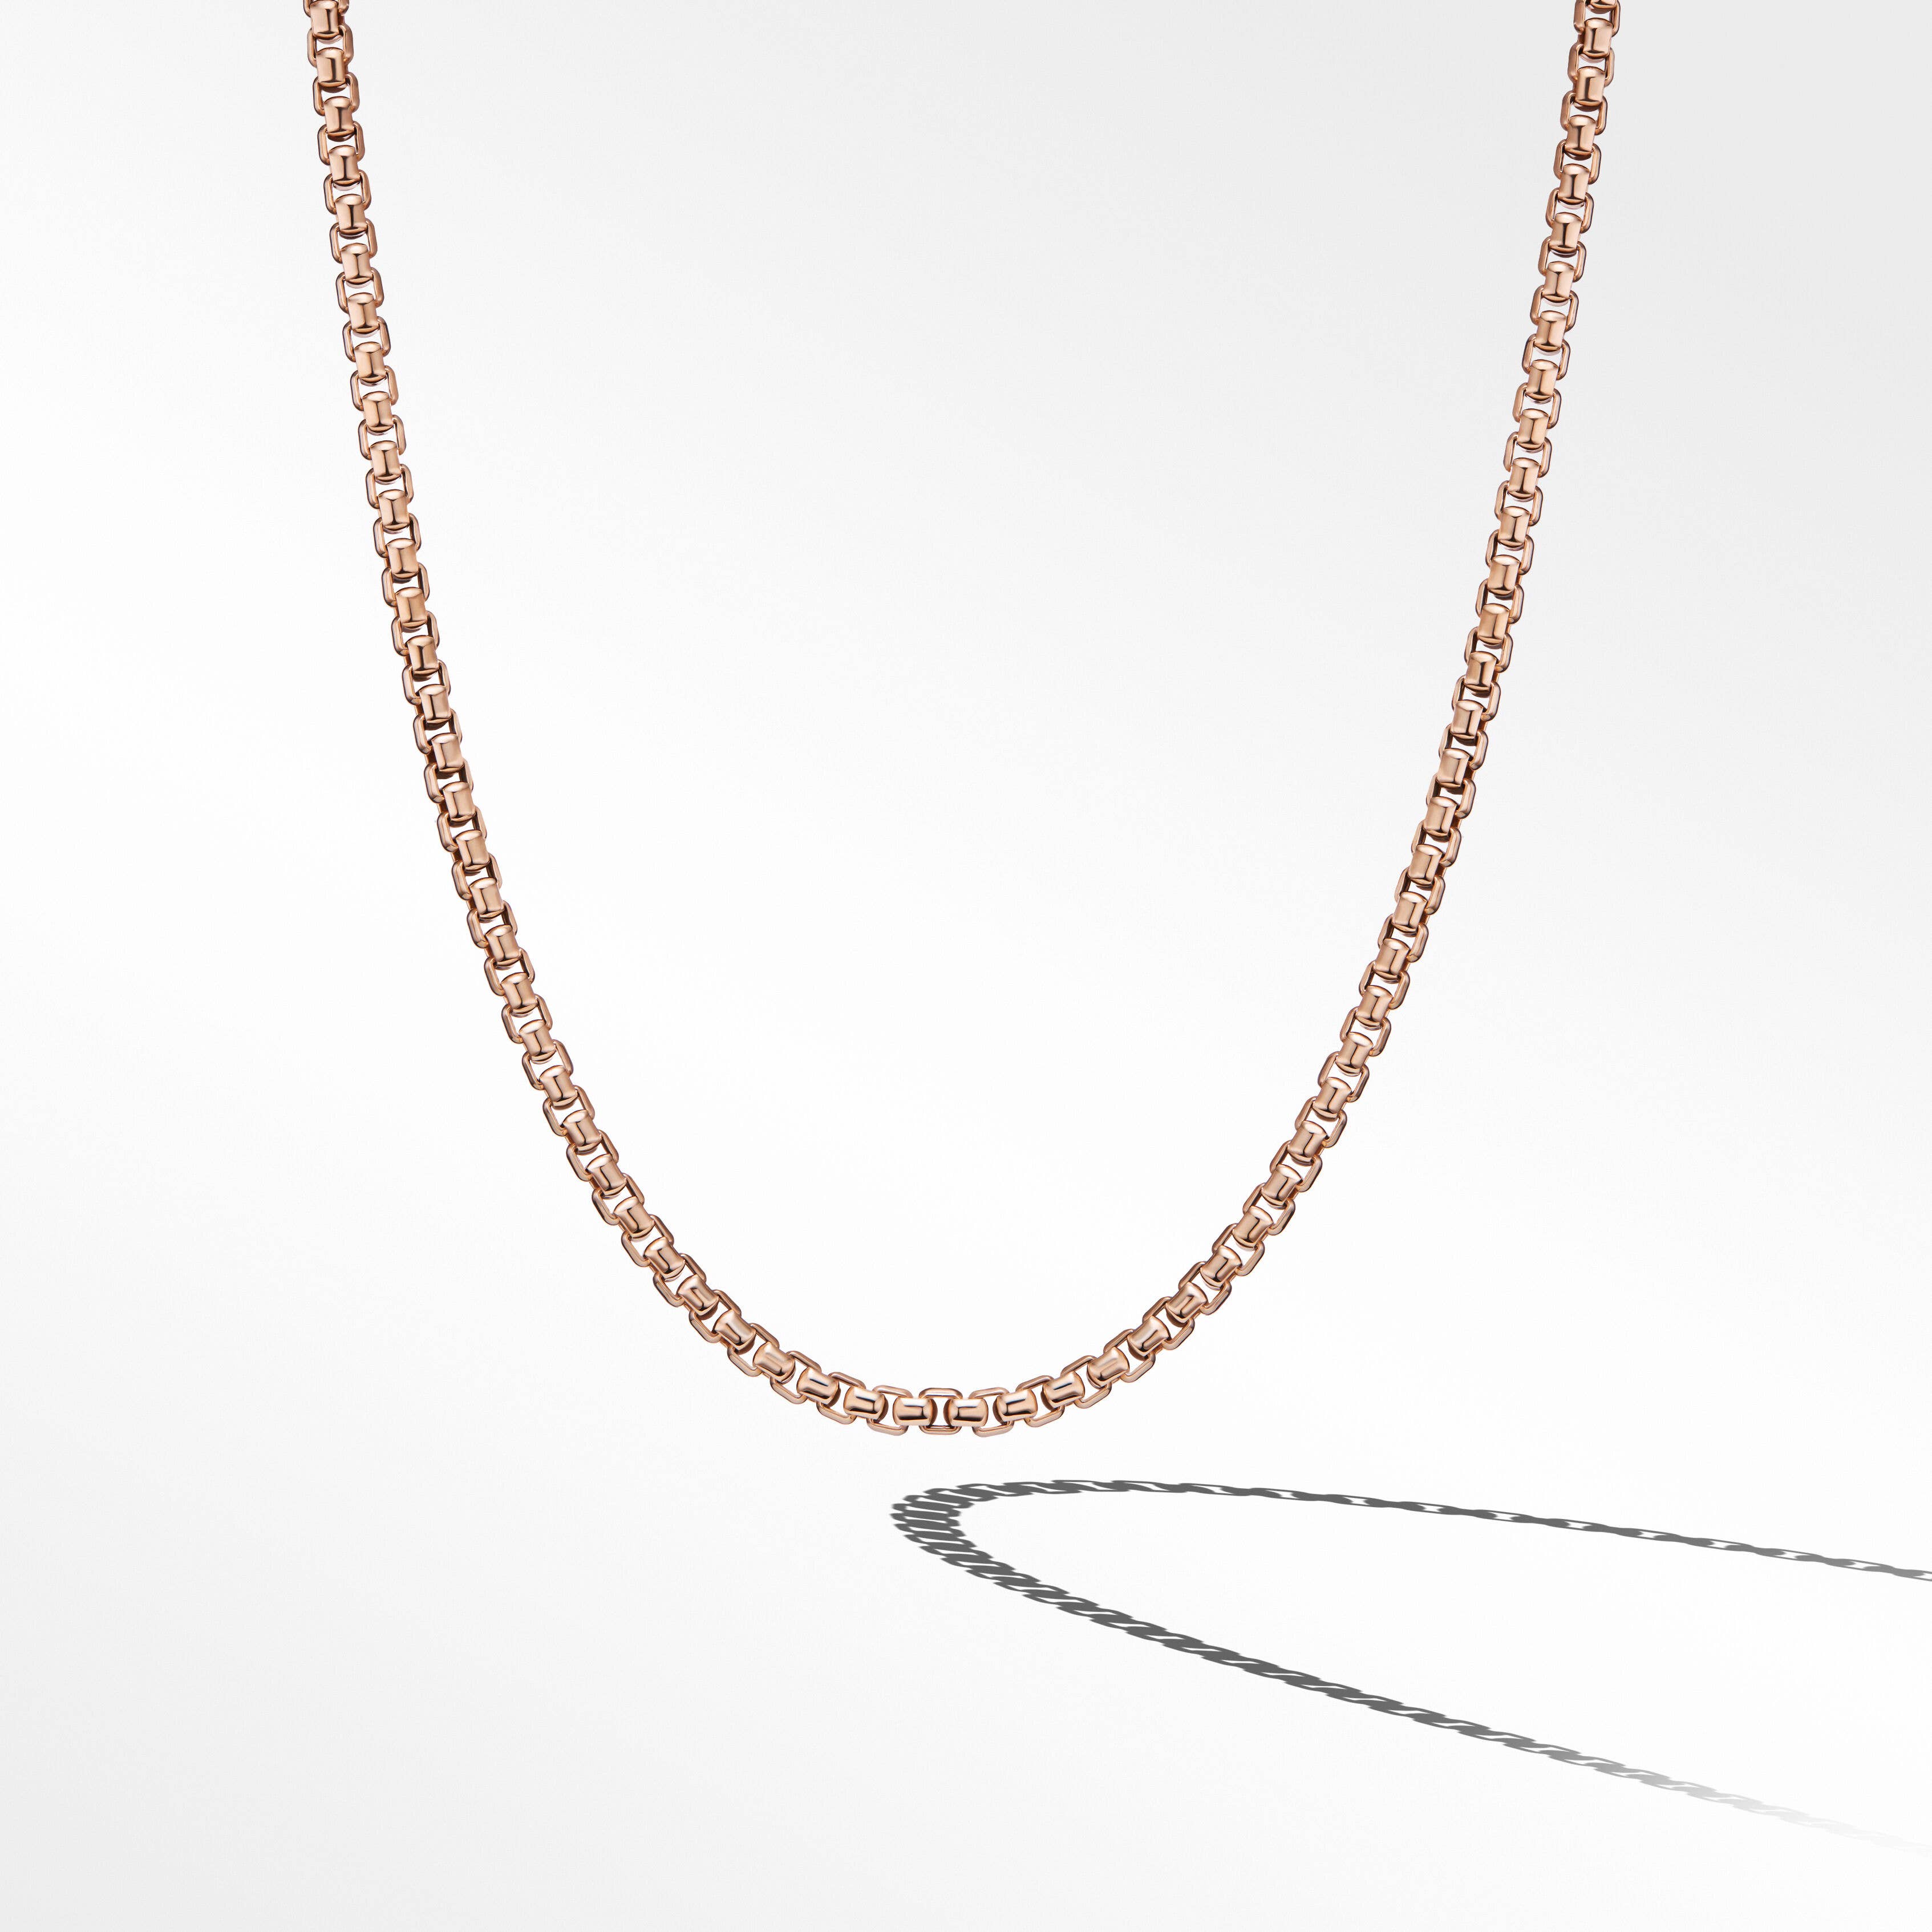 Box Chain Necklace in 18K Rose Gold, 5mm